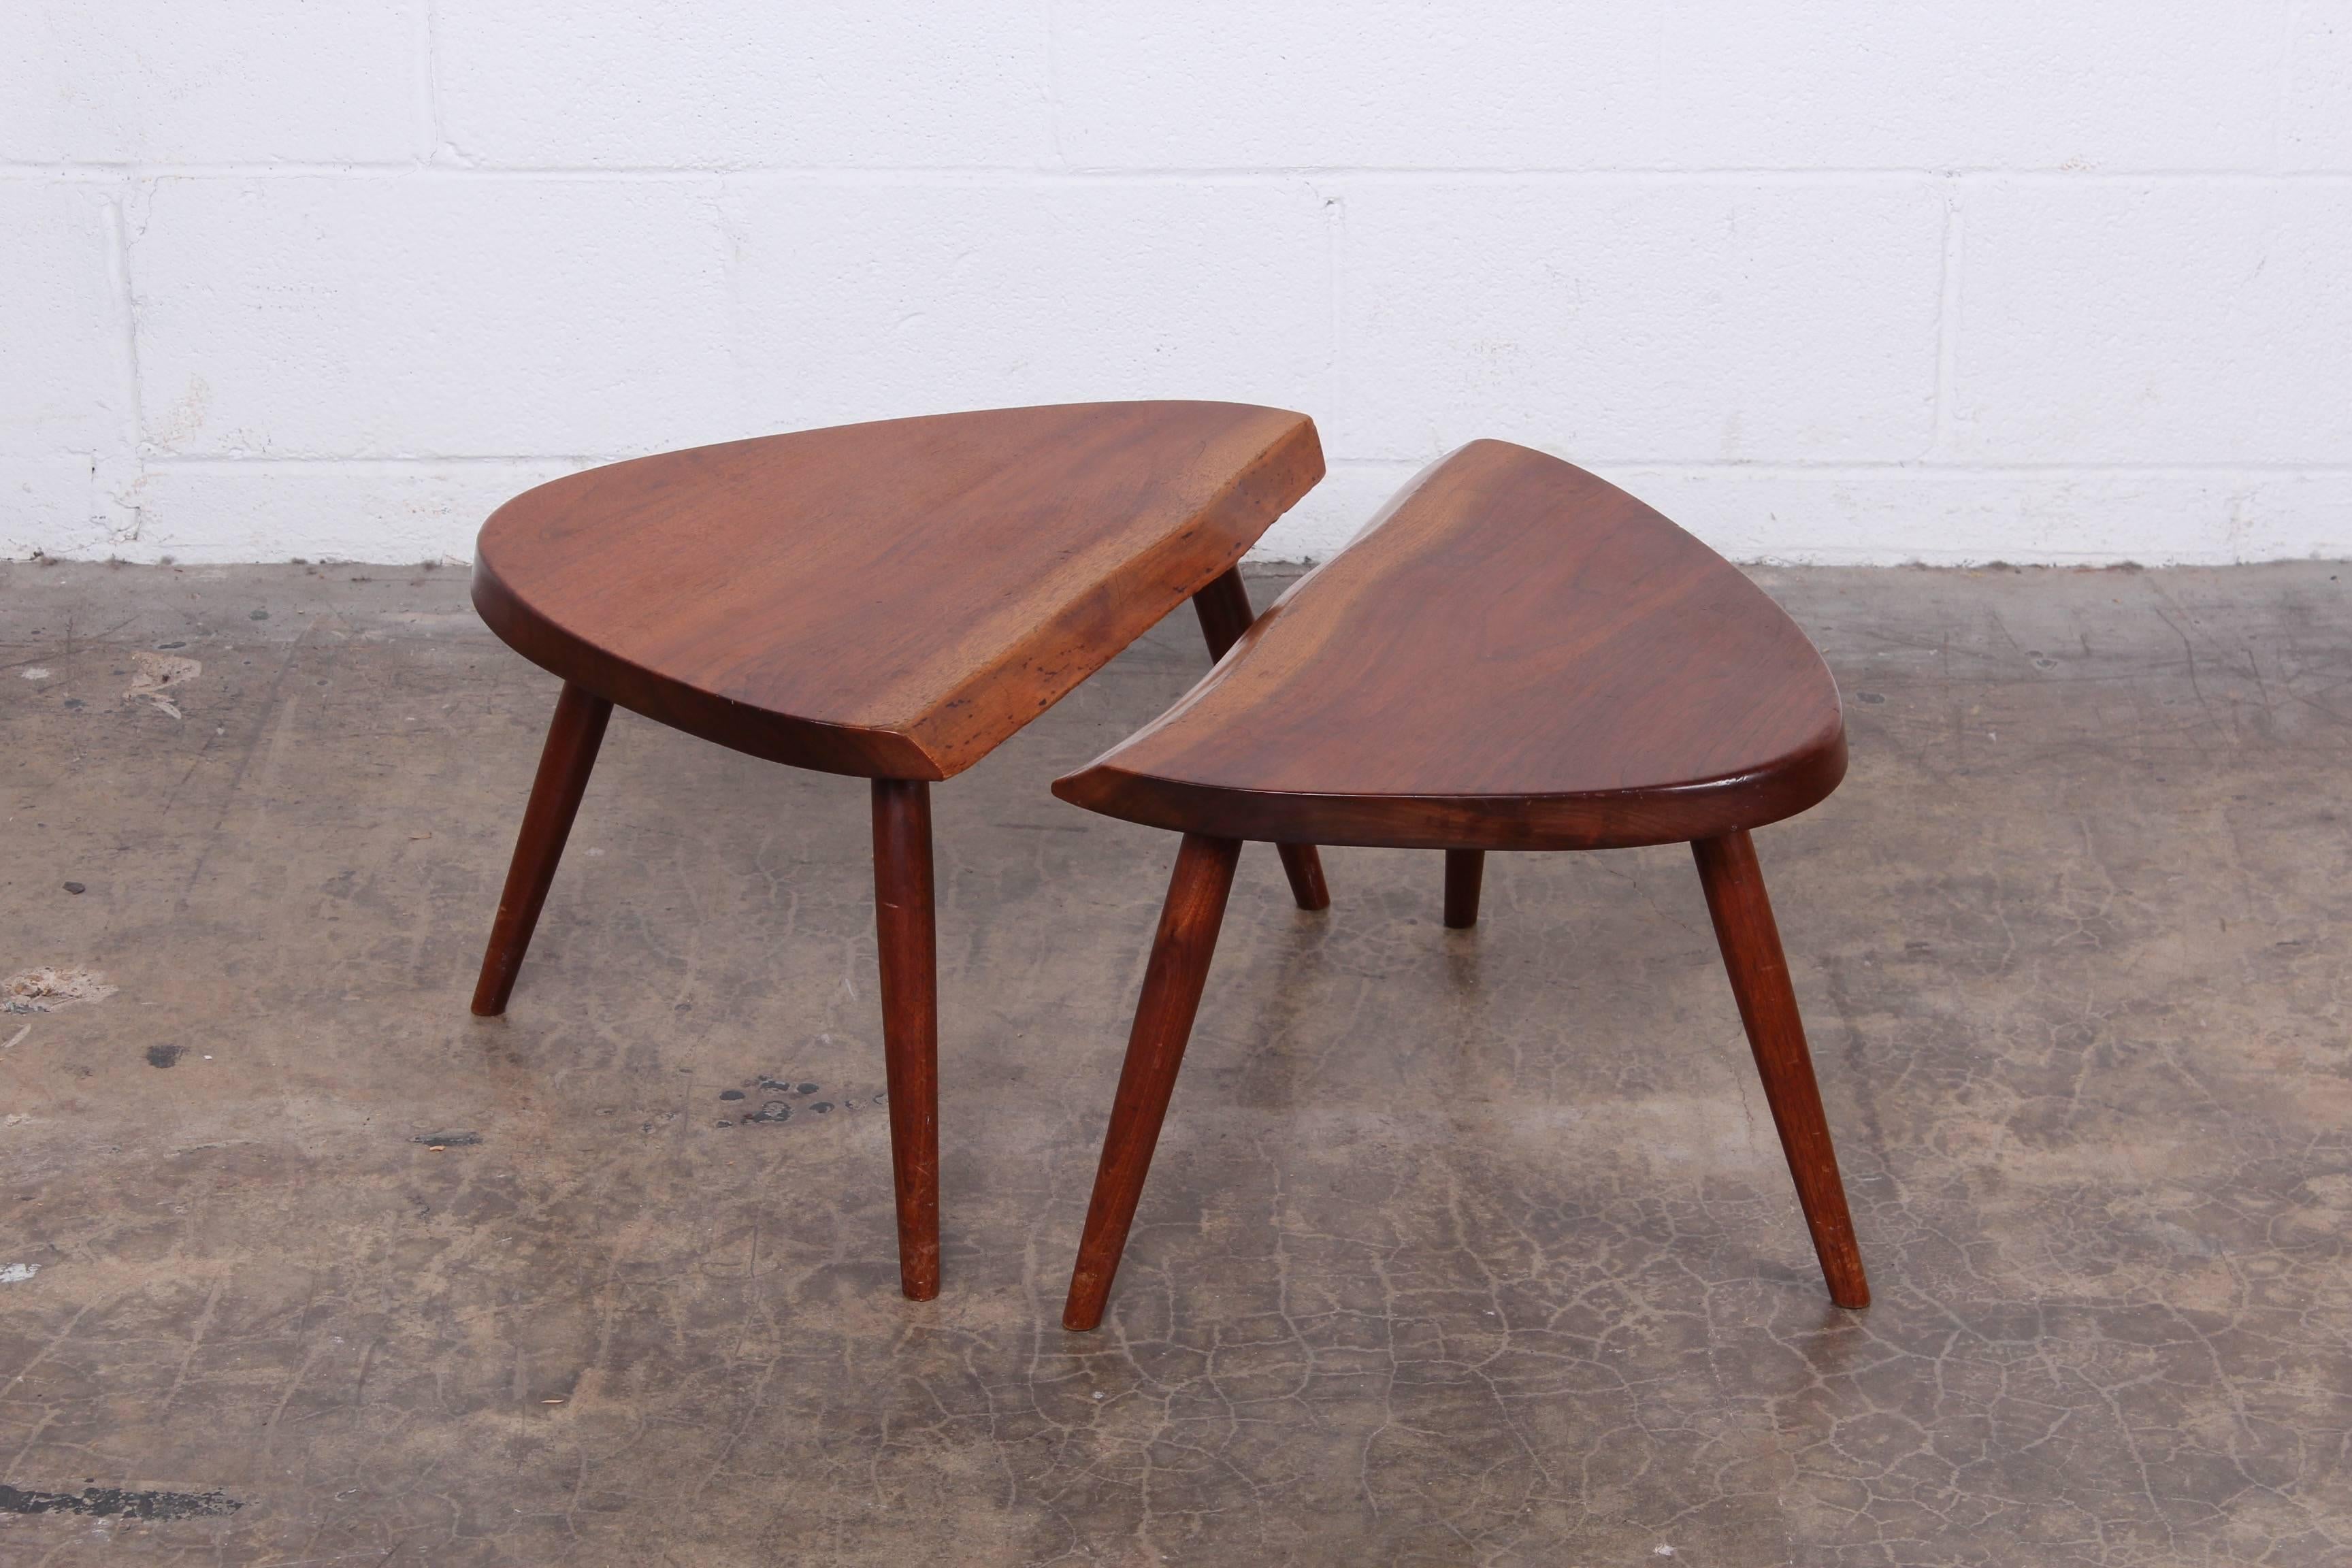 A pair of free edge, sap grain walnut side tables by George Nakashima, 1961. These are sold with a copy of the original order card.